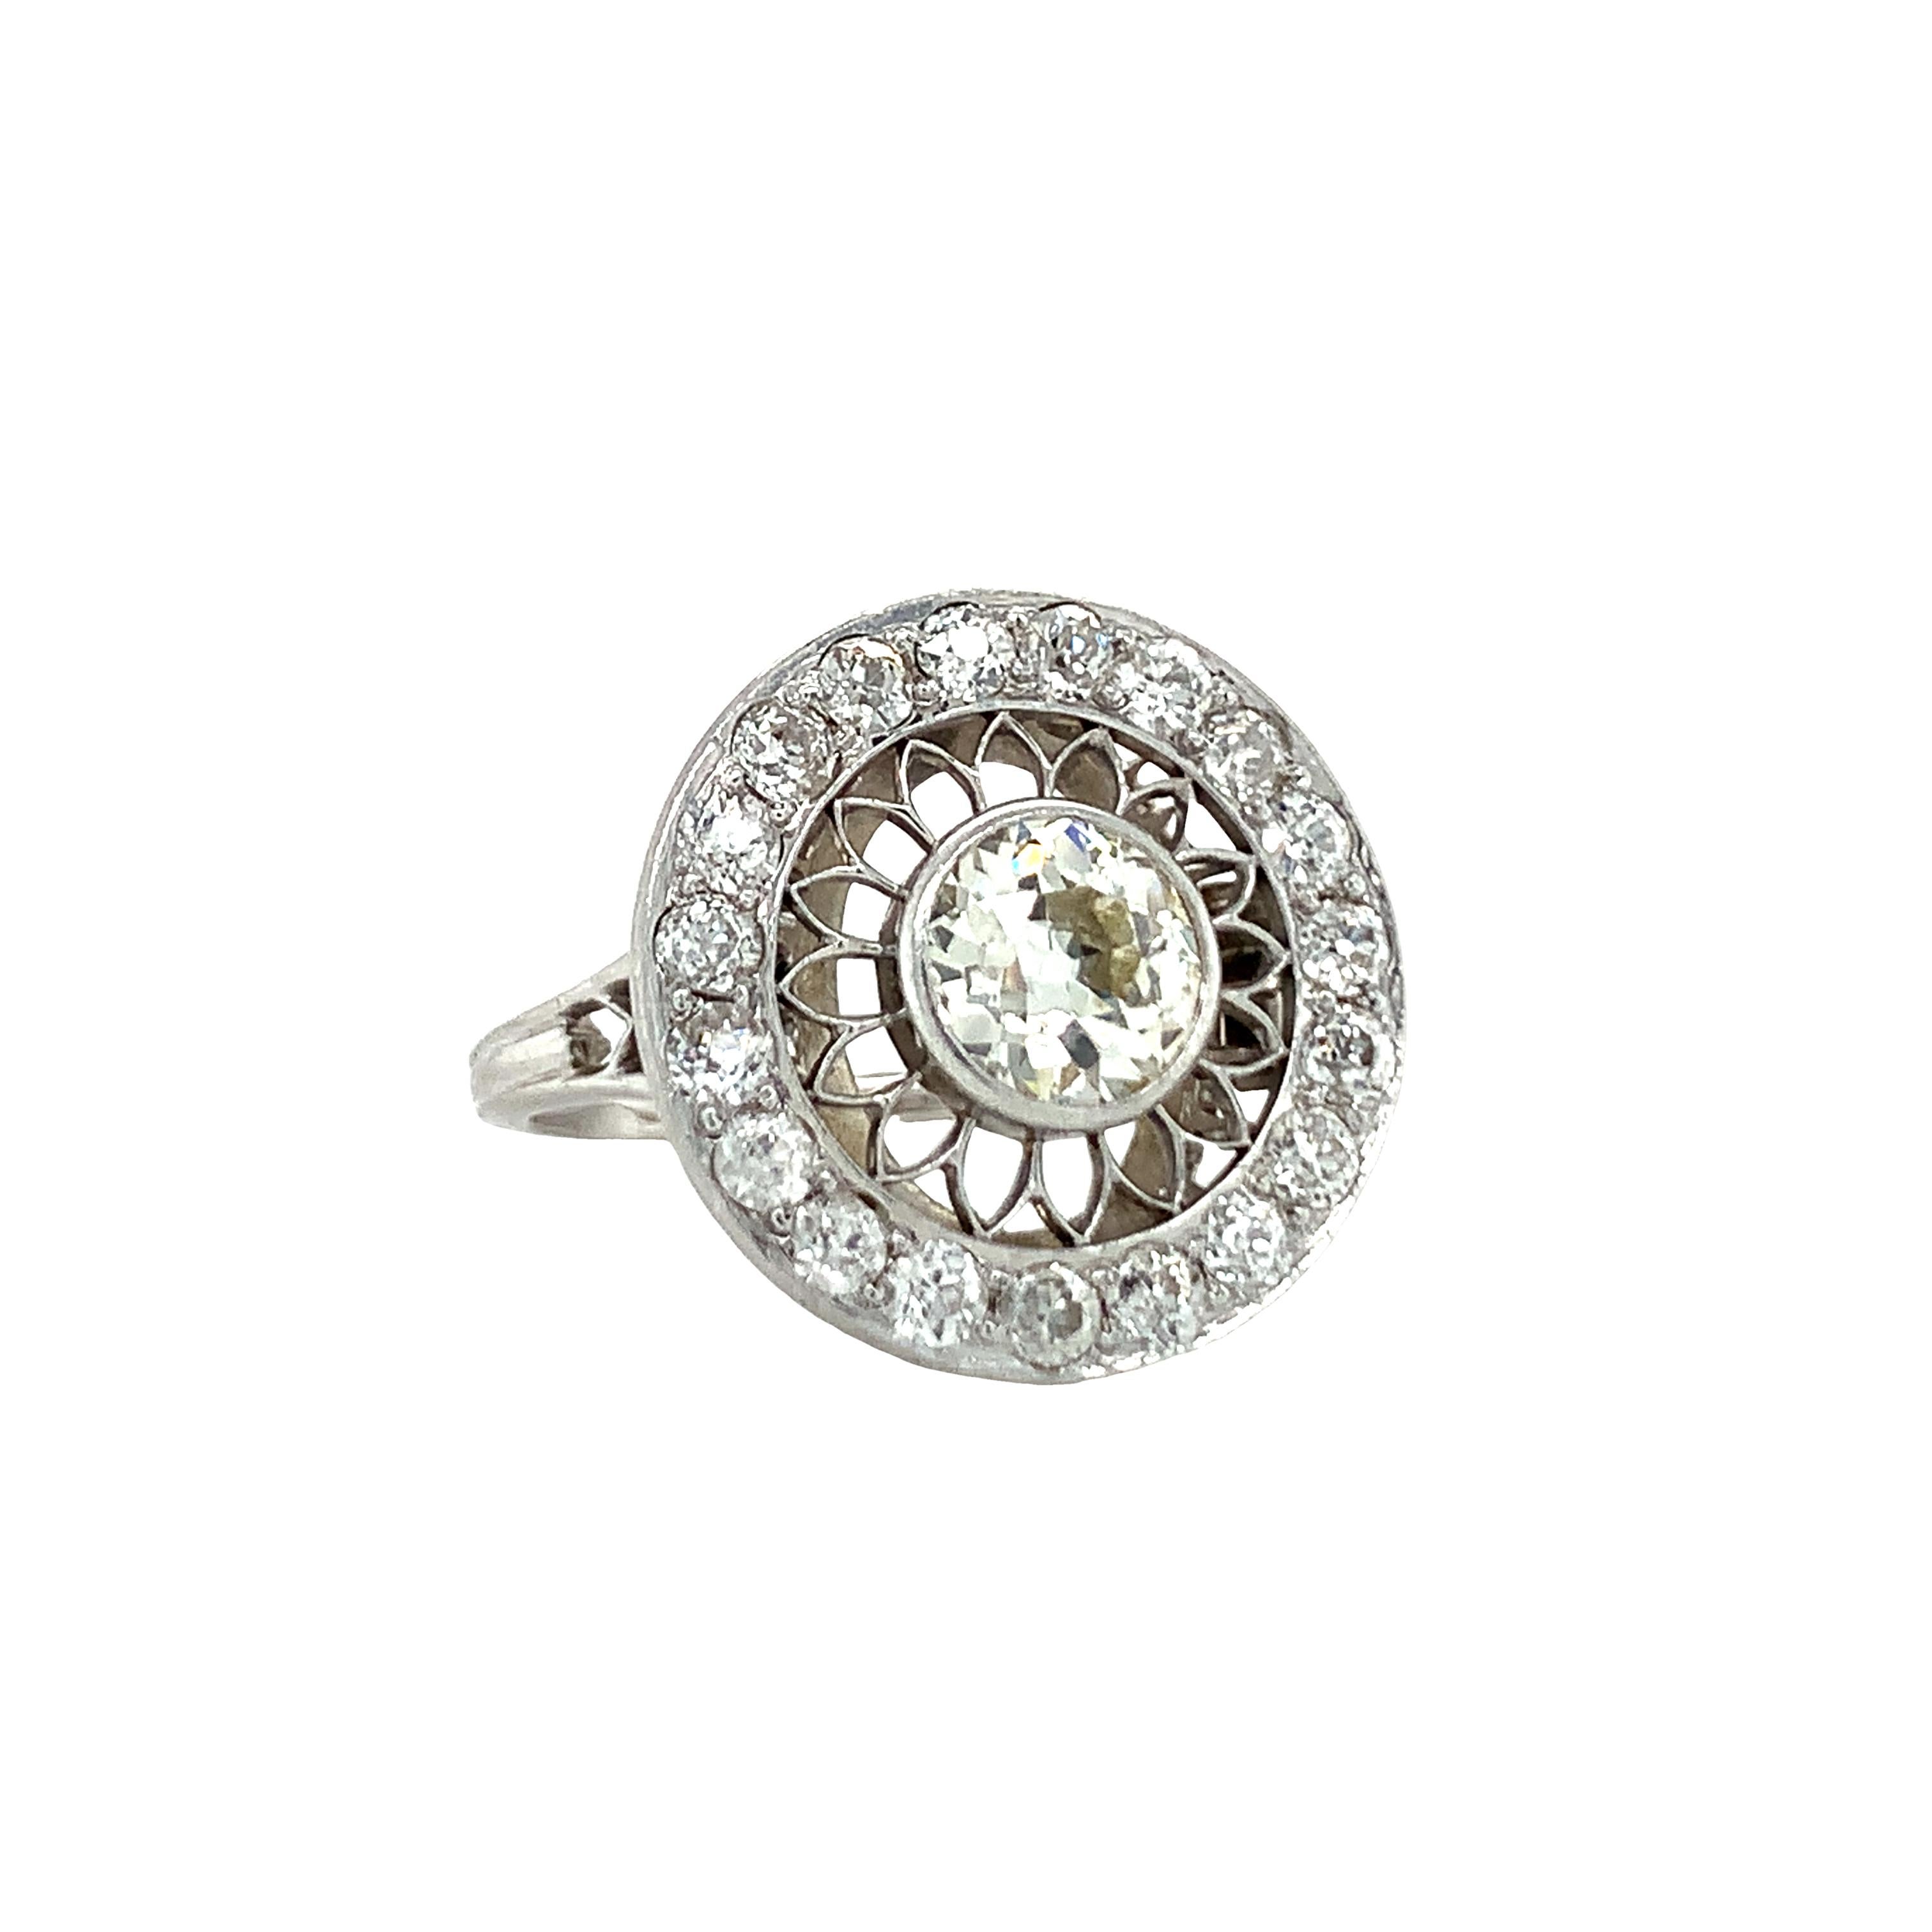 One Art Deco platinum diamond ring with circular open work design centering one bezel set, old European cut diamond weighing 1 ct. with K-L color and SI-1 clarity surrounded by 19 bead set, old European cut diamonds totaling 0.62 ct. with J color